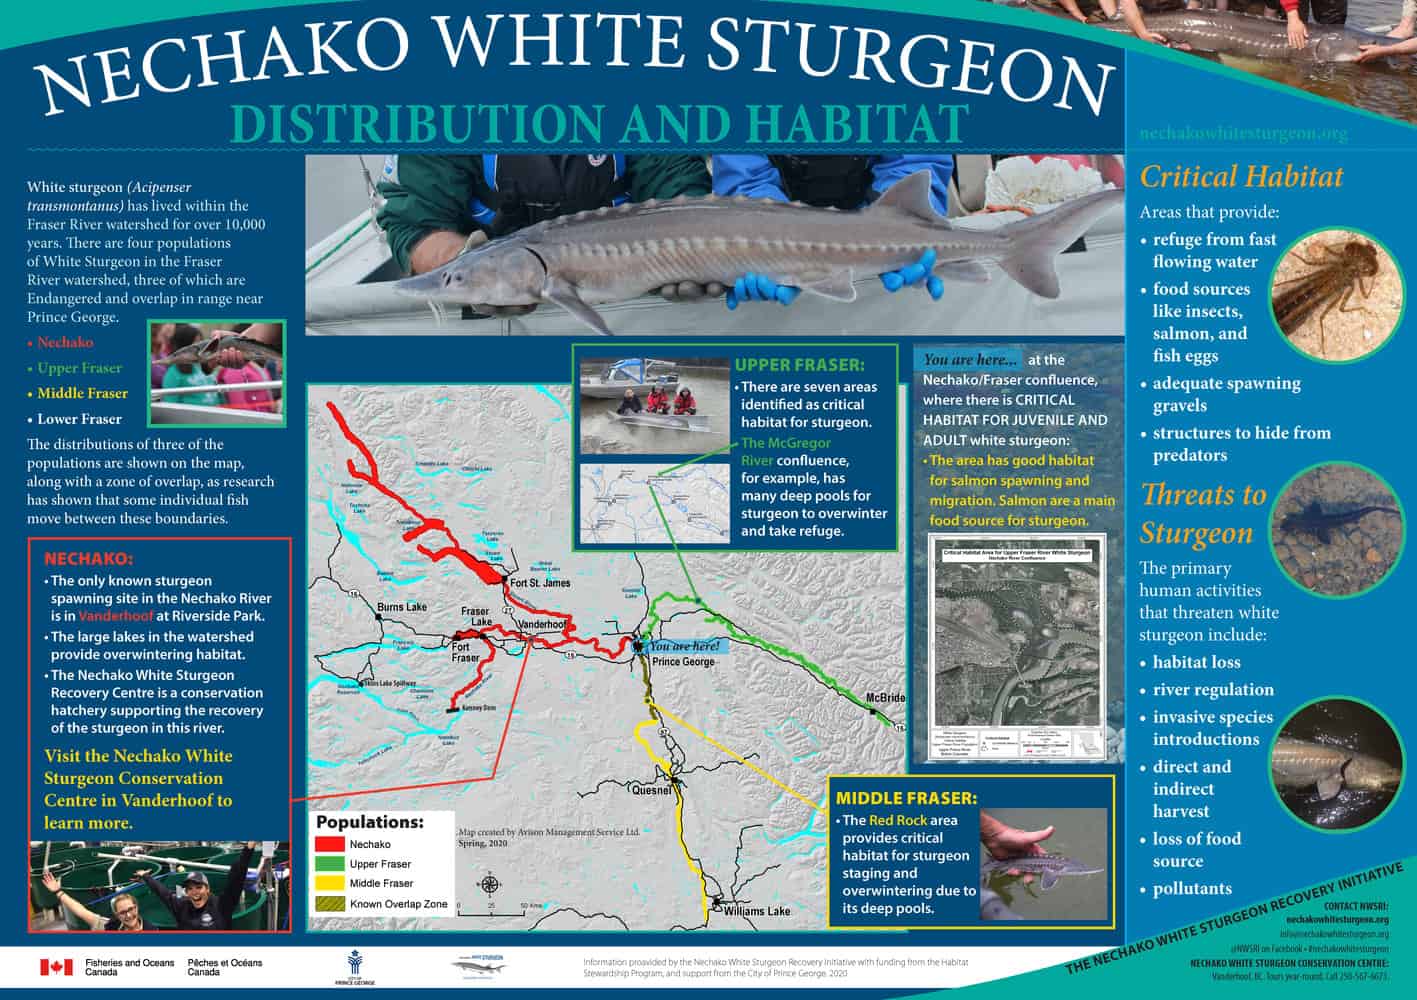 Sign about Distribution of Sturgeon in the Nechako and Upper Fraser